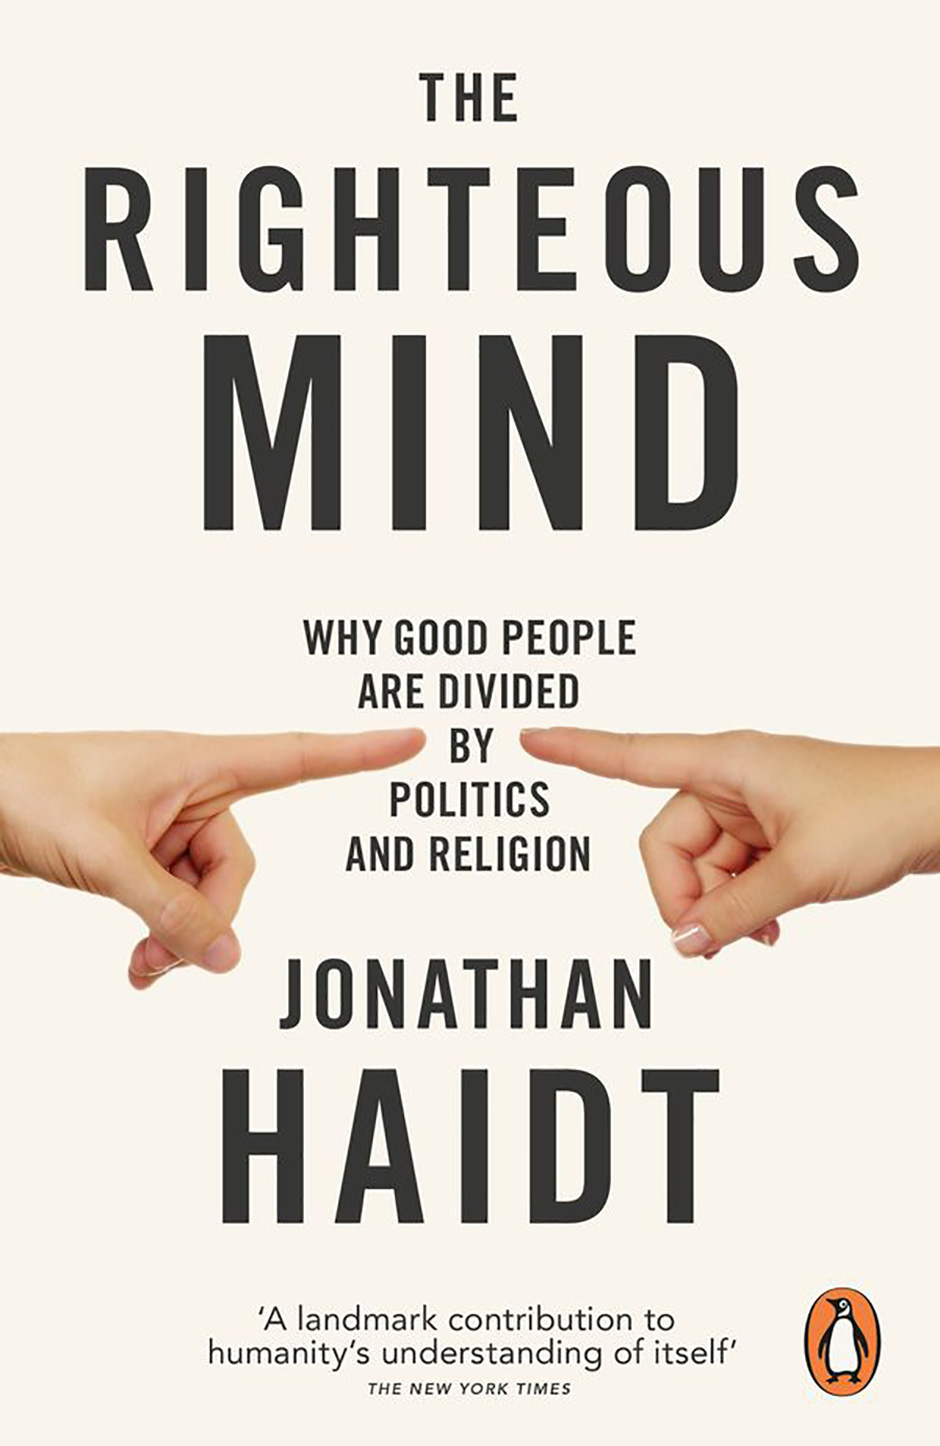 The Righteous Mind by Jonathan Haidt is Spencer Hamilton's book choice for his Slam City Skates 'Offerings' interview